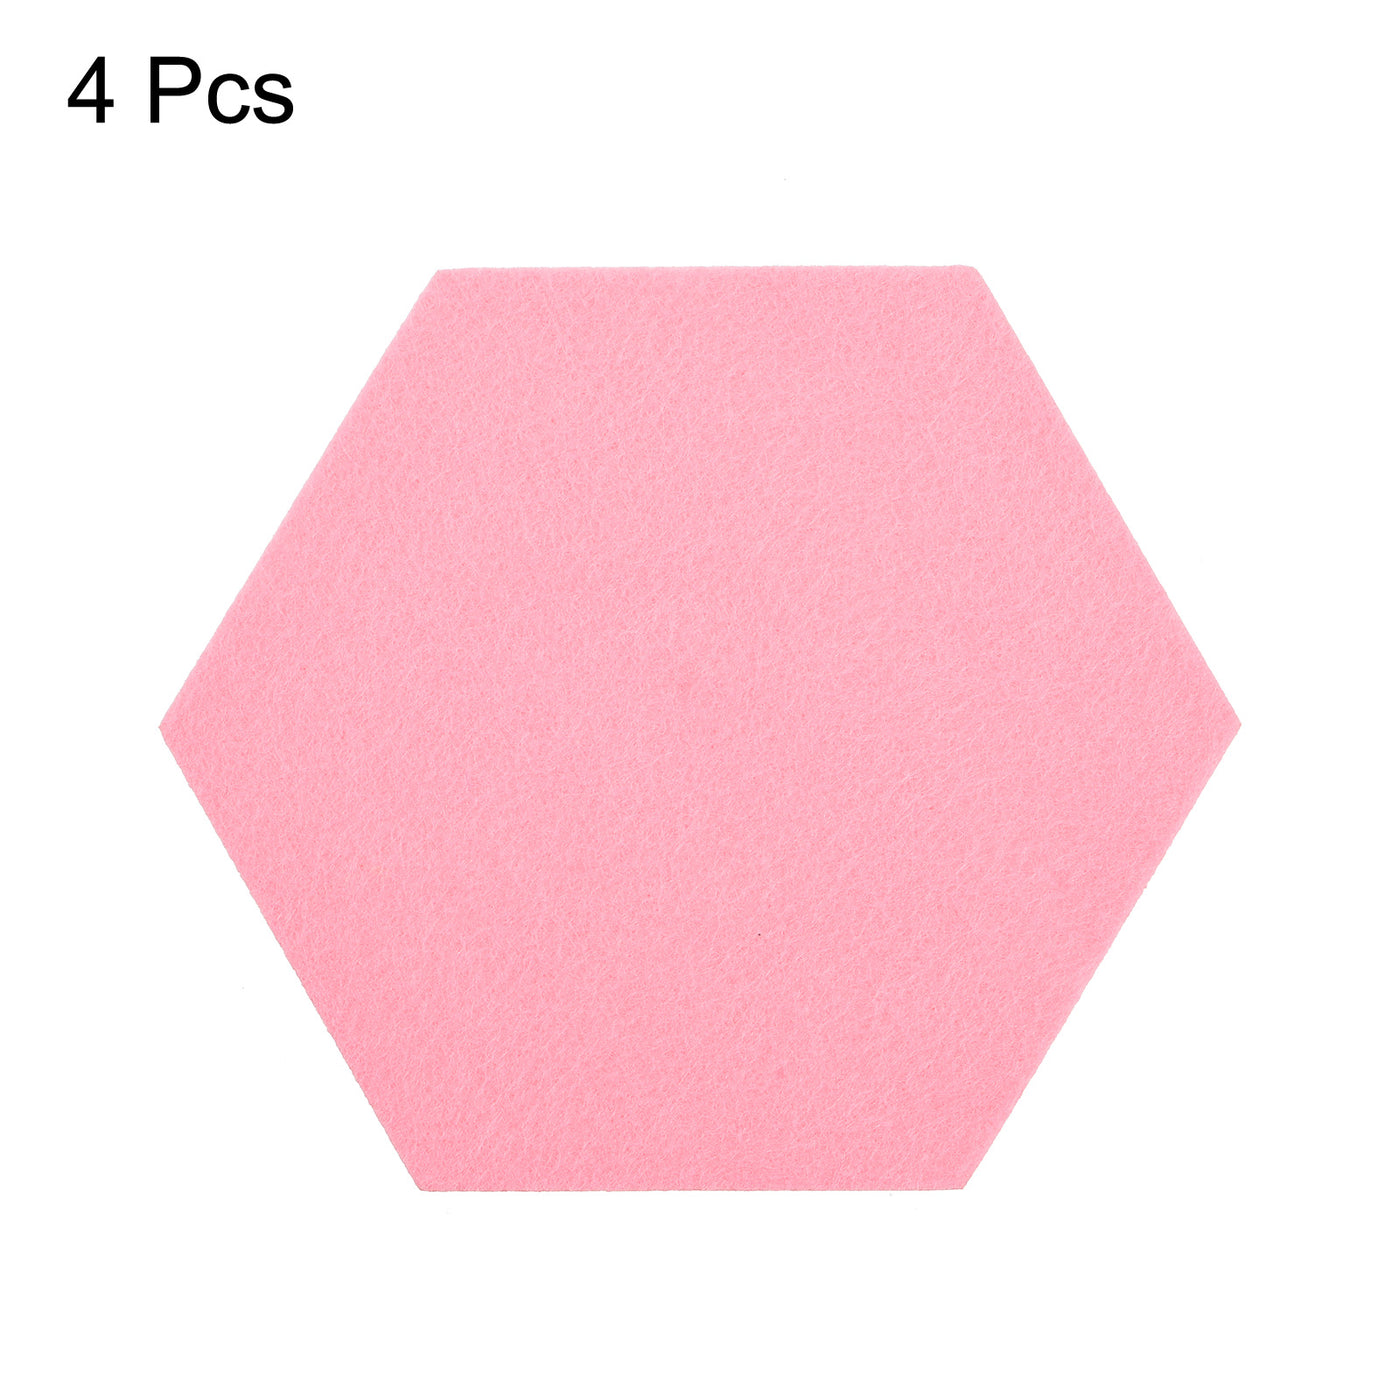 uxcell Uxcell Felt Coasters 4pcs Absorbent Pad Coaster for Drink Cup Pot Bowl Vase Pink